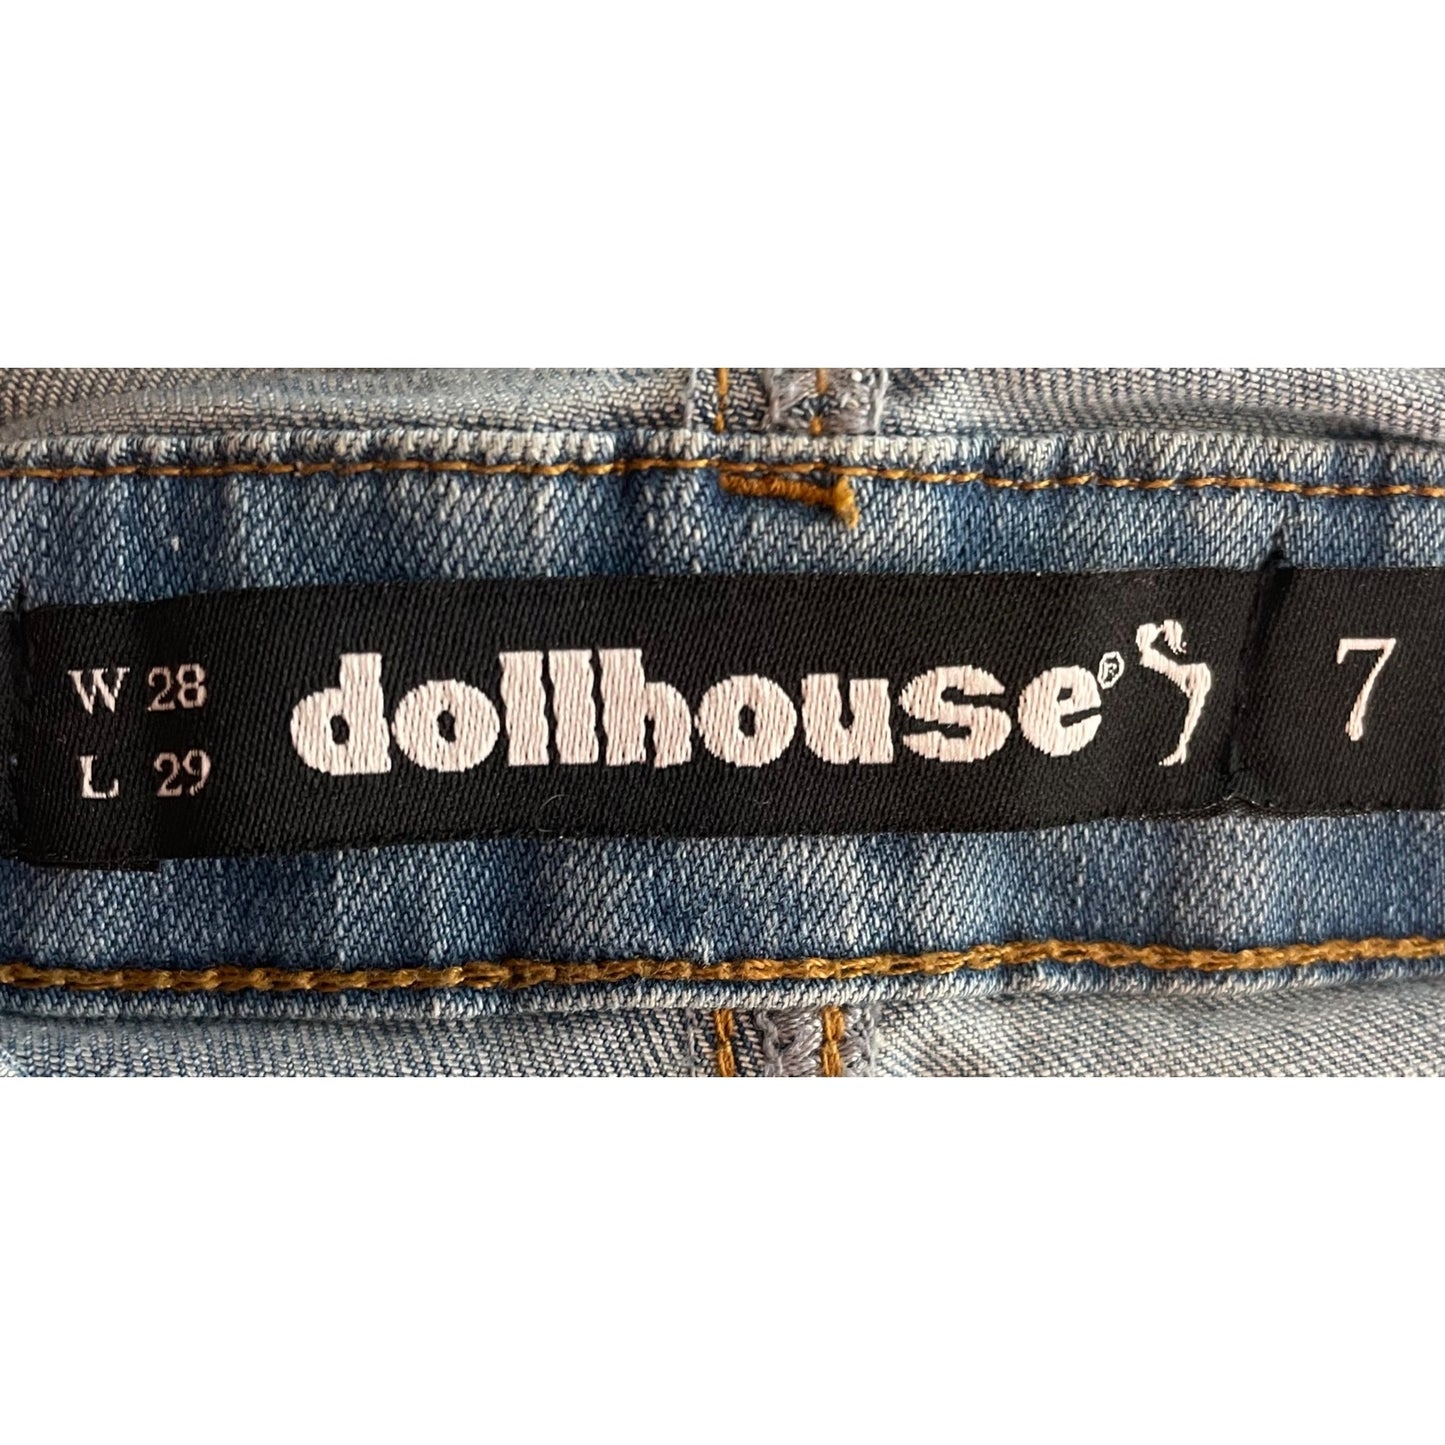 Dollhouse Women's Size 7 Distressed Blue Jean Denim Ripped Dungarees/Overalls